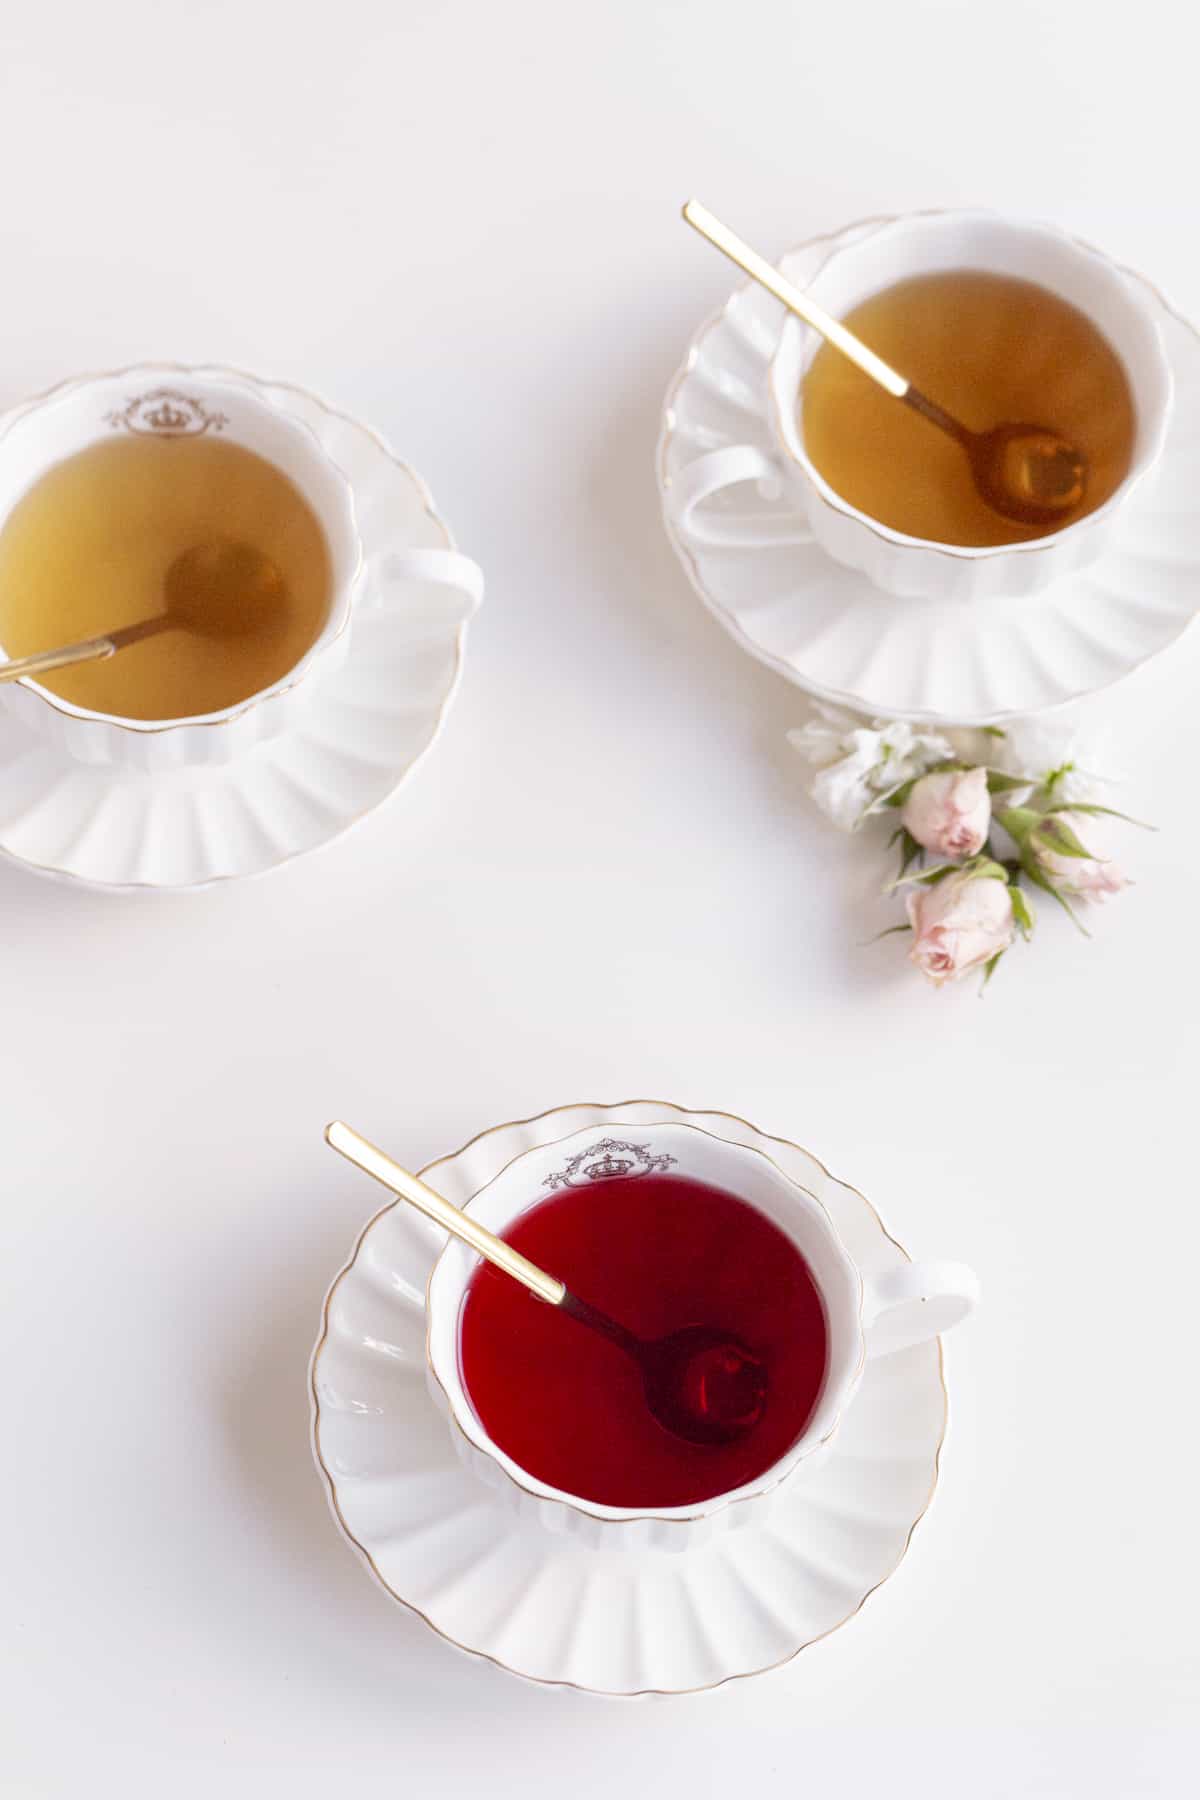 tea time at home with teas in cups and sauces